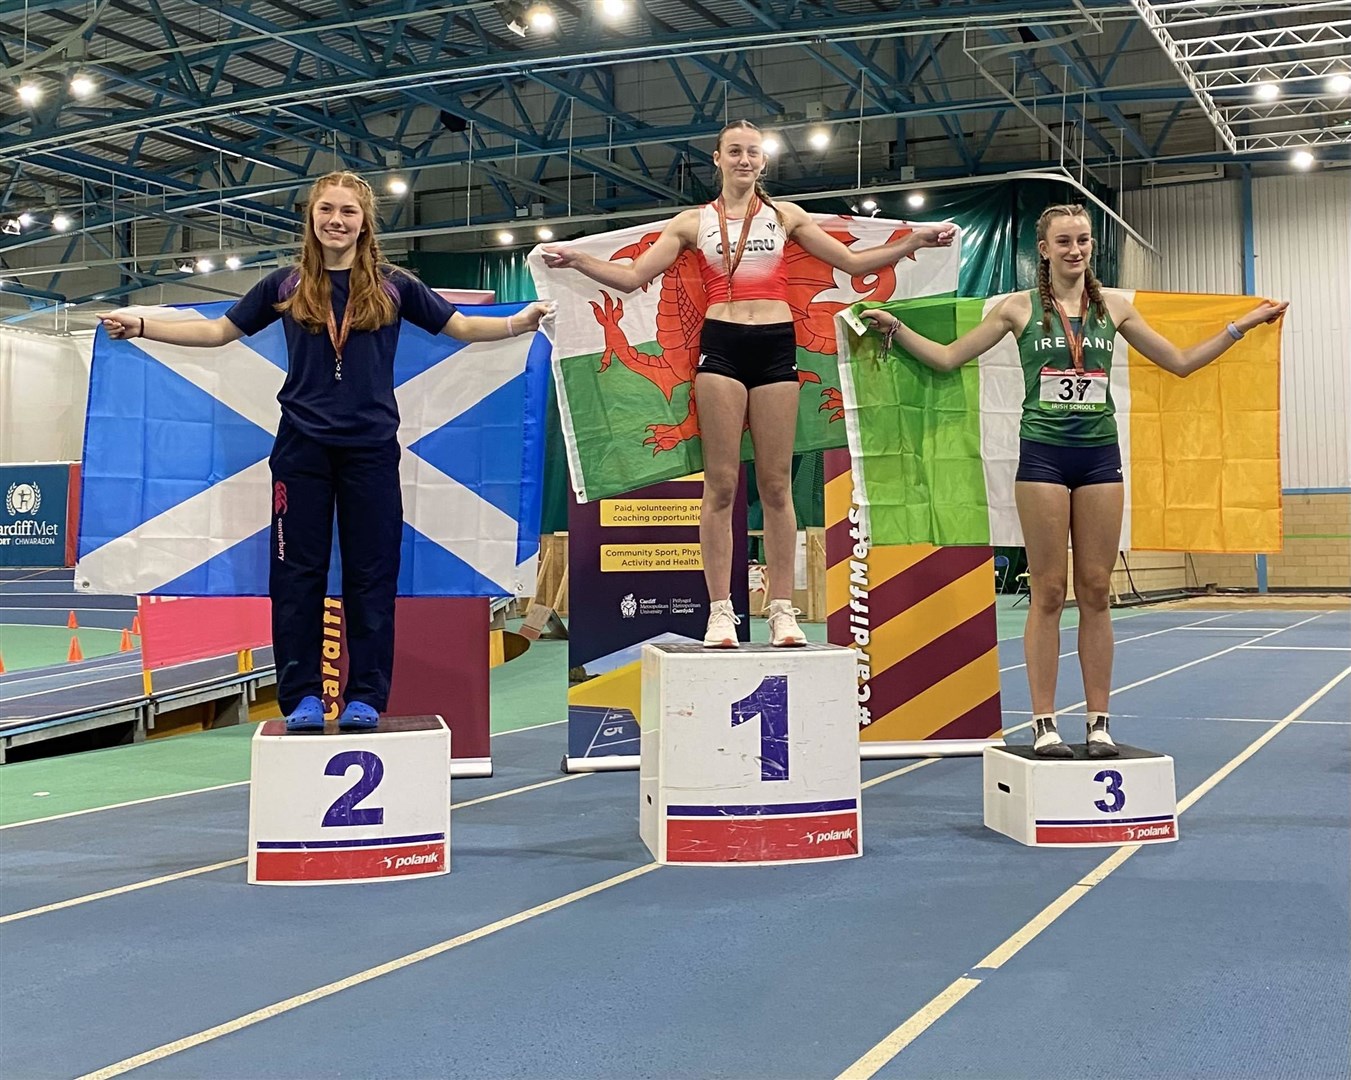 Holly Whittaker was second in the pentathlon competition behind Welsh rival Olivia Schrimshaw.